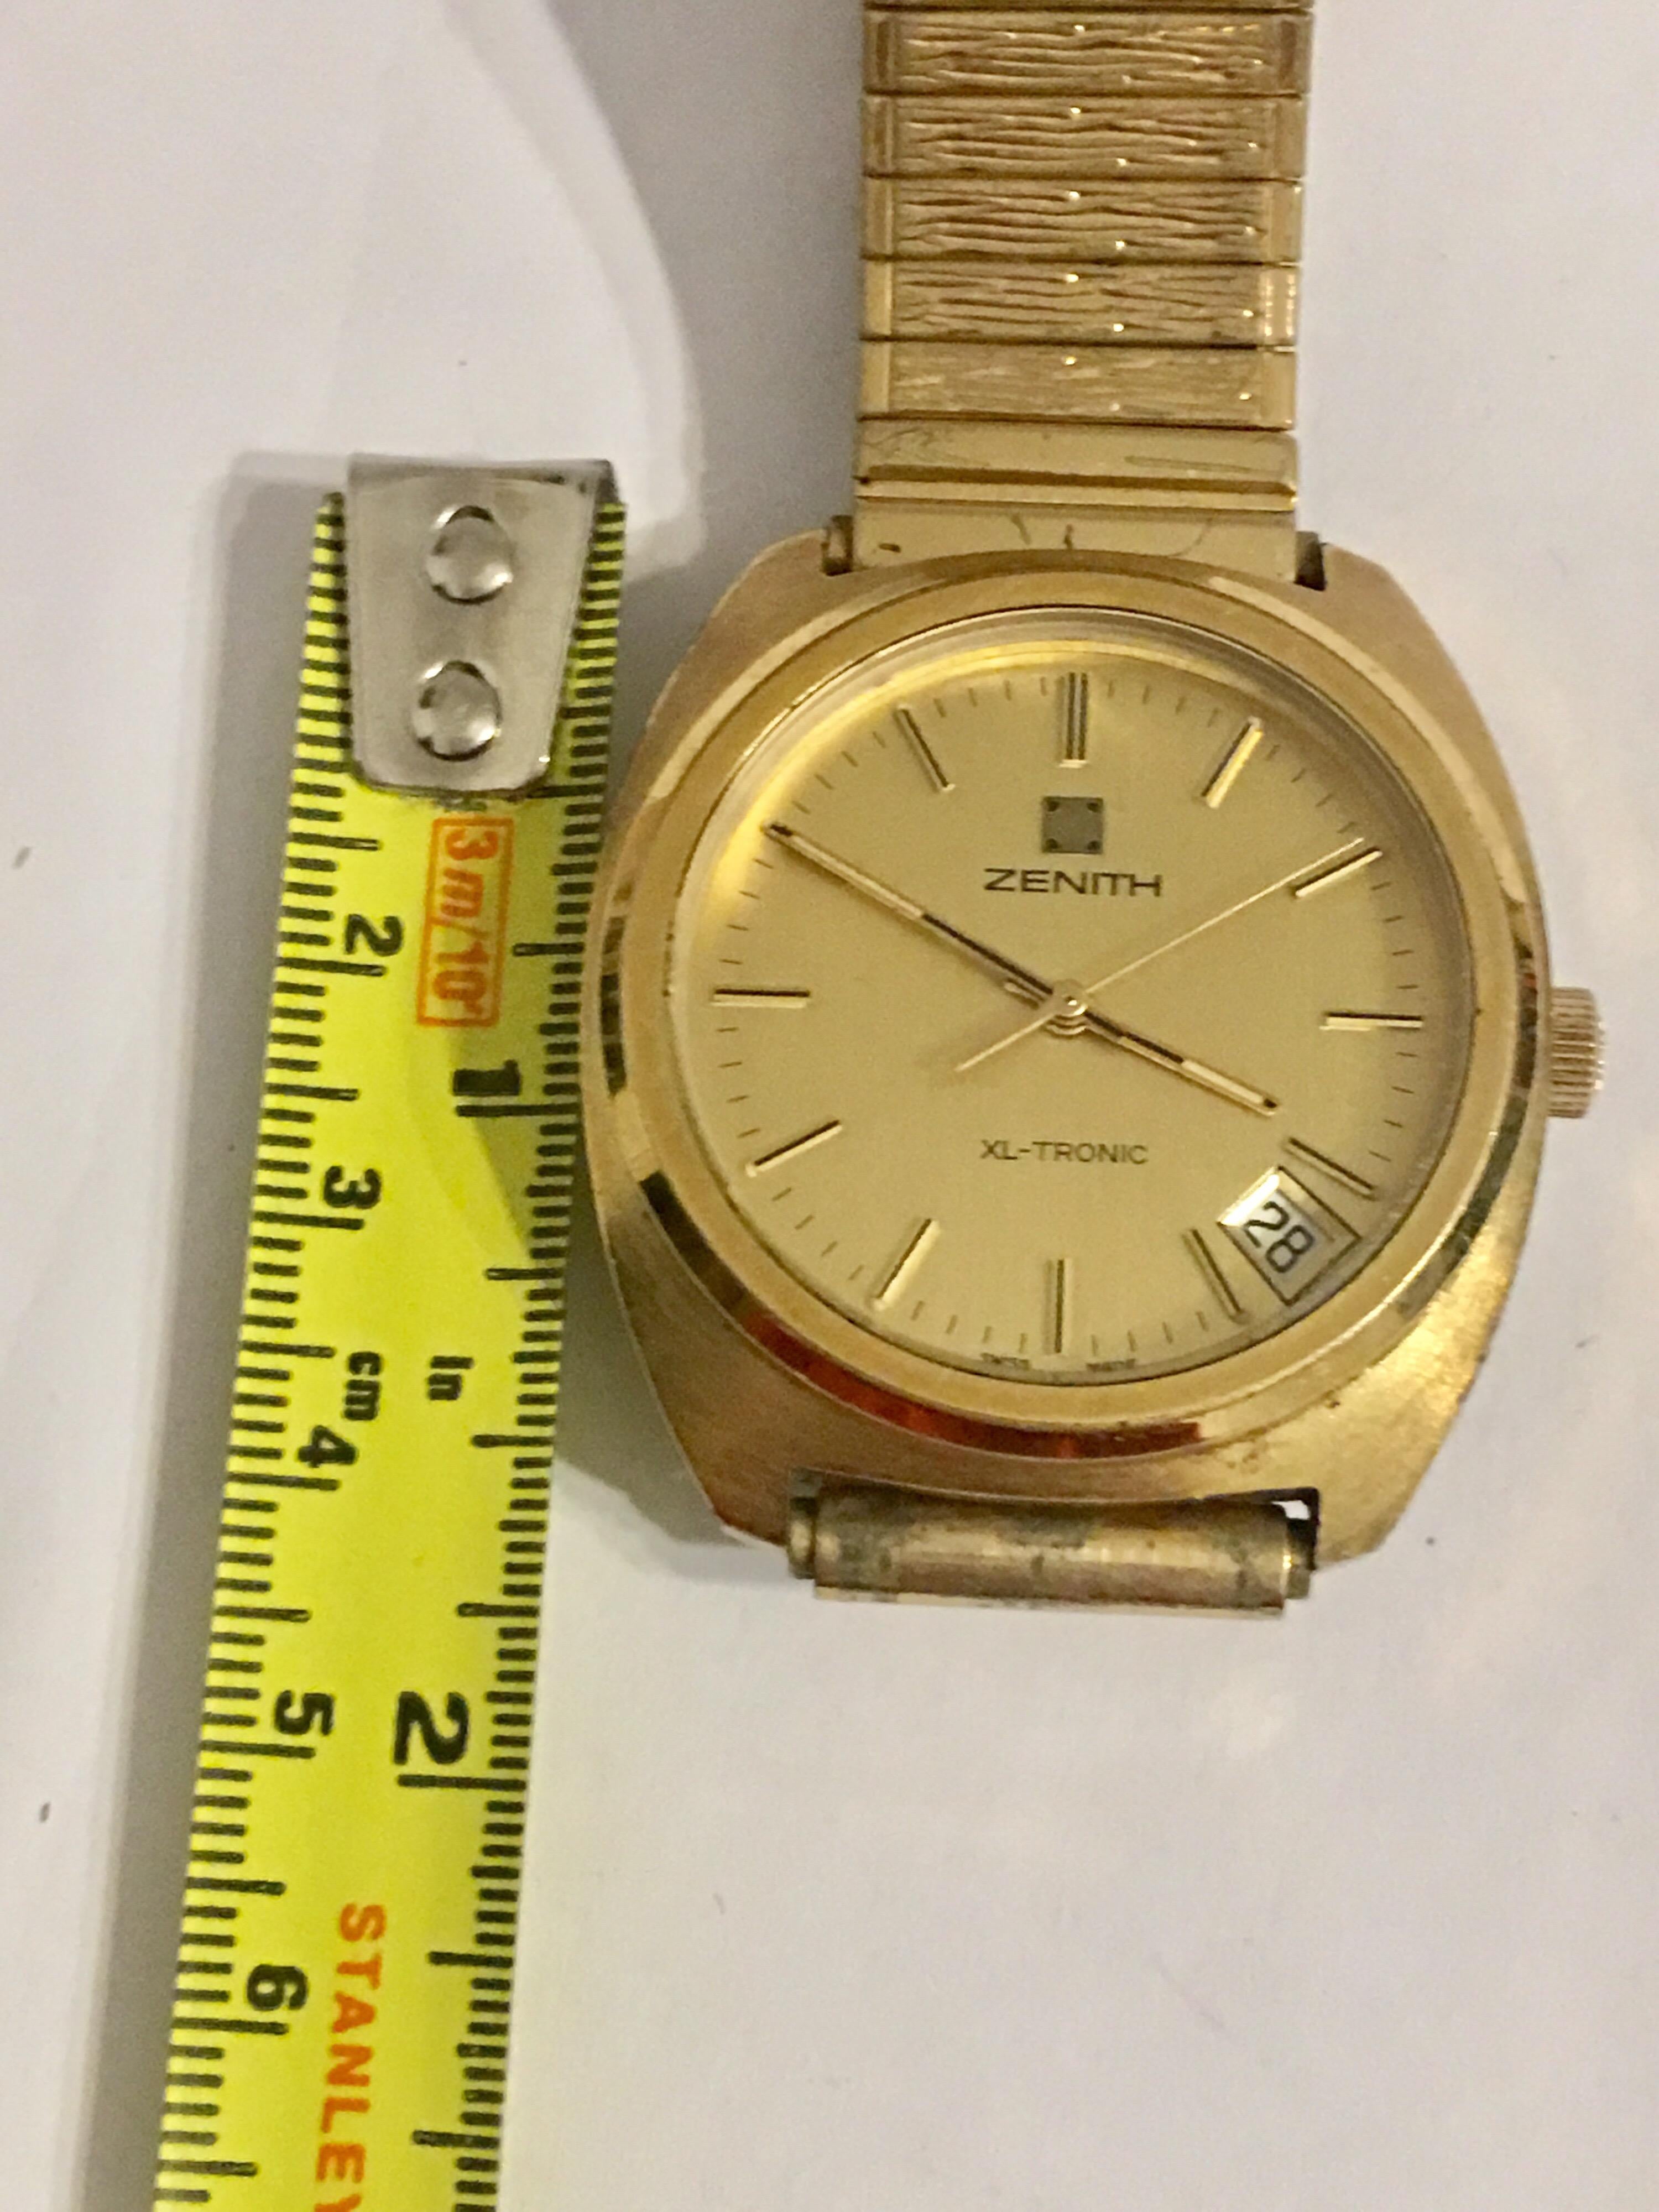 Vintage 1970s Zenith XL-Tronic Gold-Plated/ Stainless Steel Men’s Watch For Sale 4